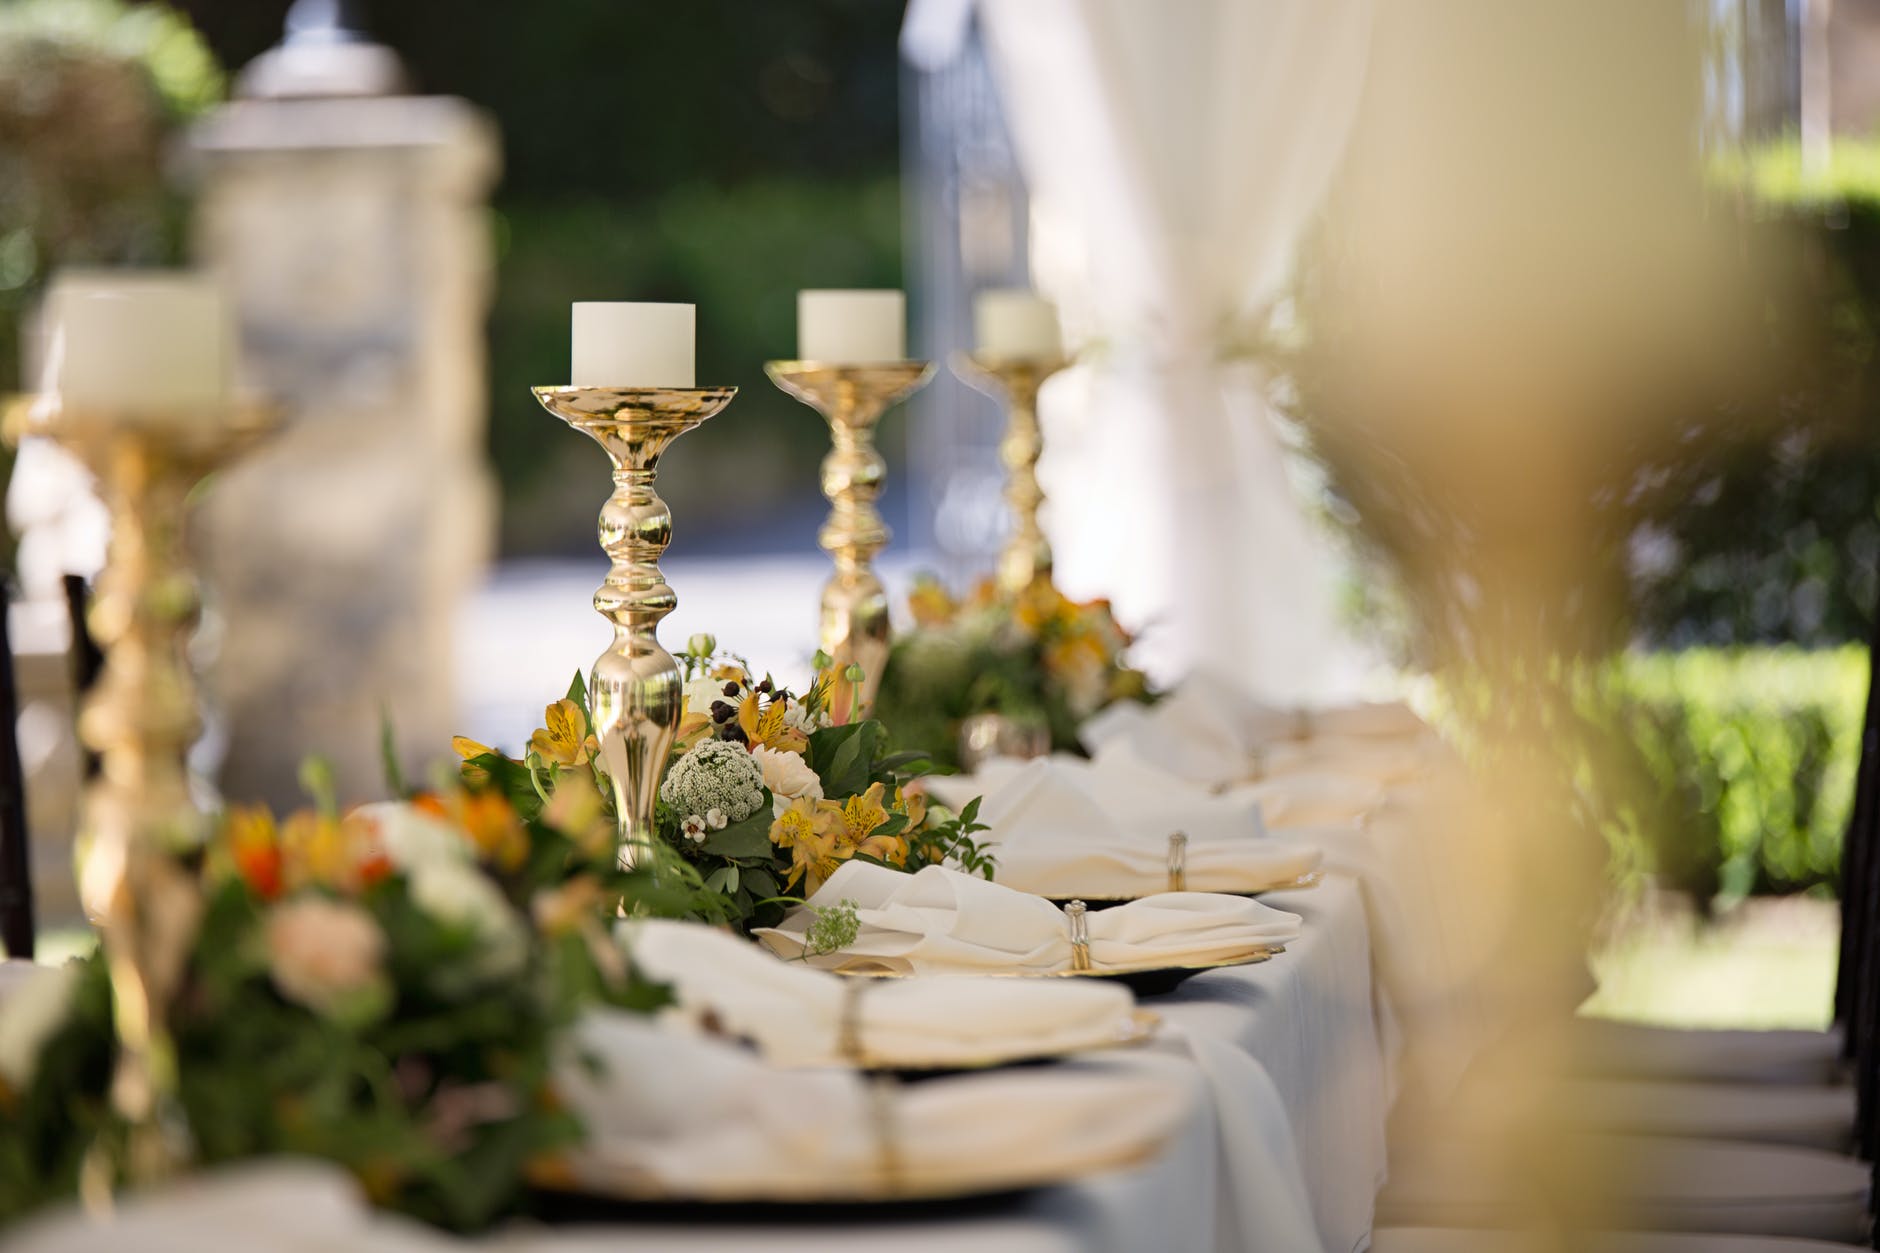 long table with flowers, linens and plates outdoors